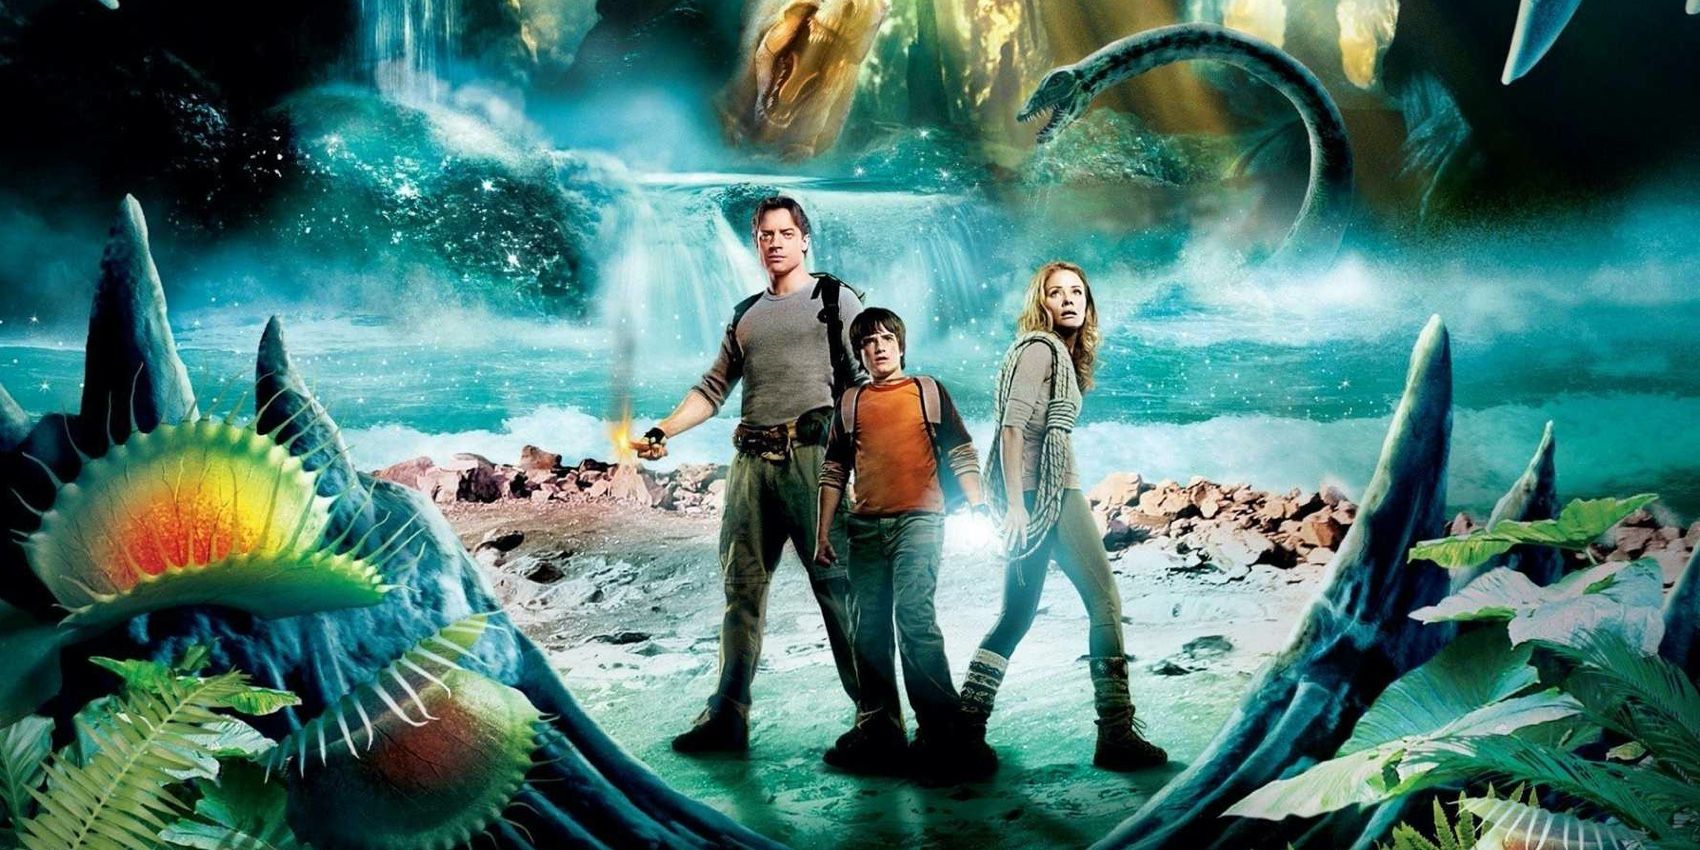 Journey to the Center of the Earth 3D movie reviews